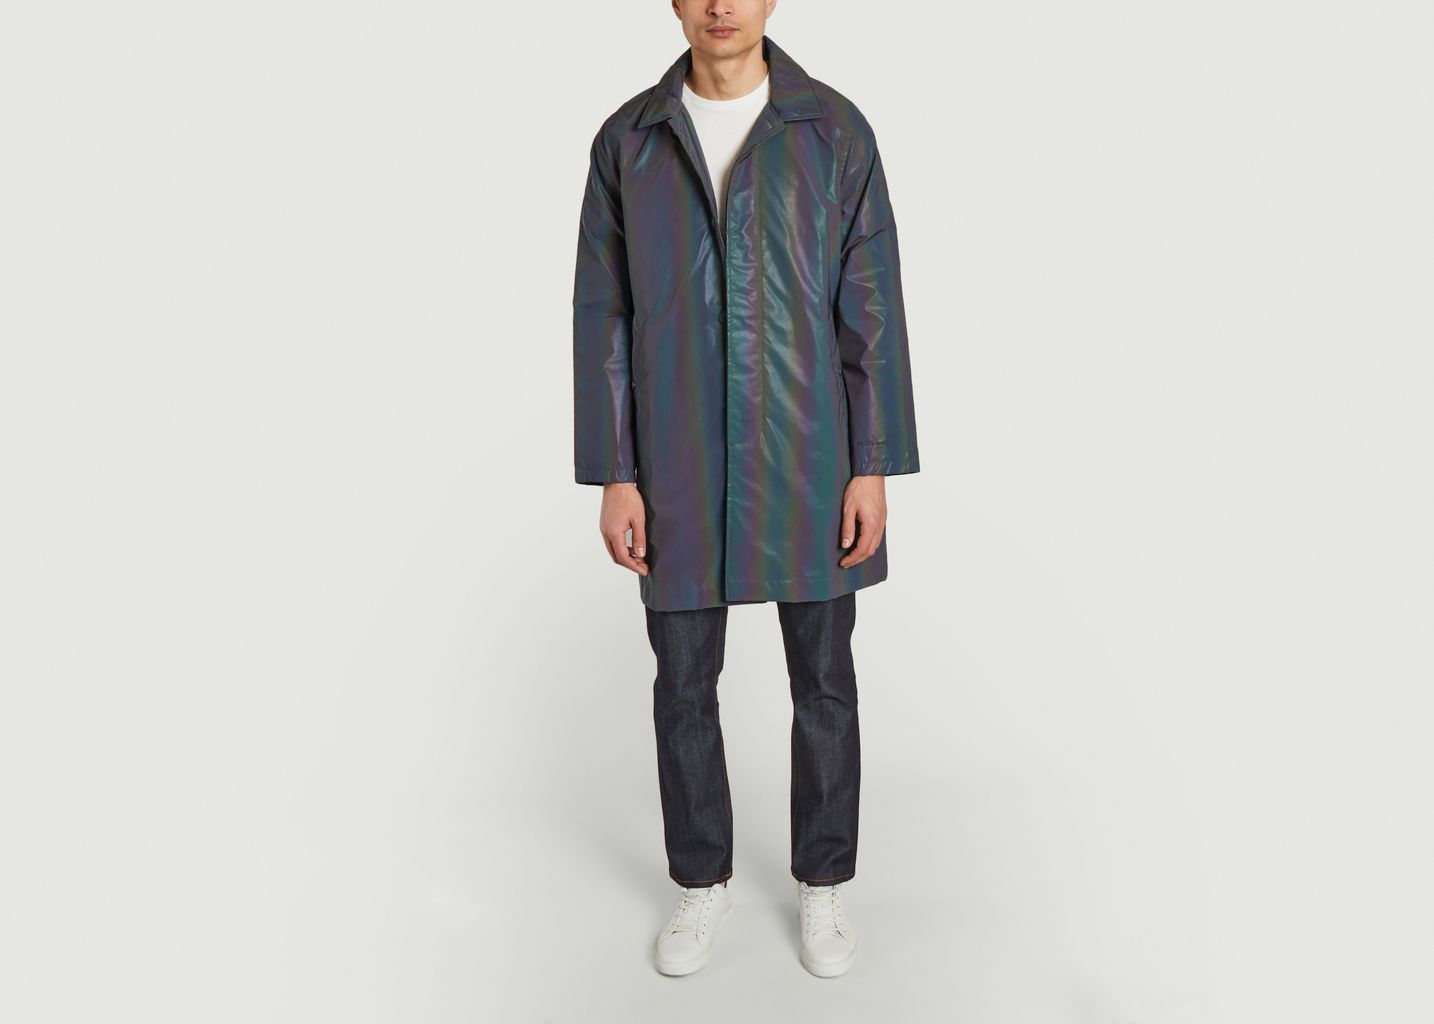 Mac reflective jacket, relaxed fit - M.C. Overalls